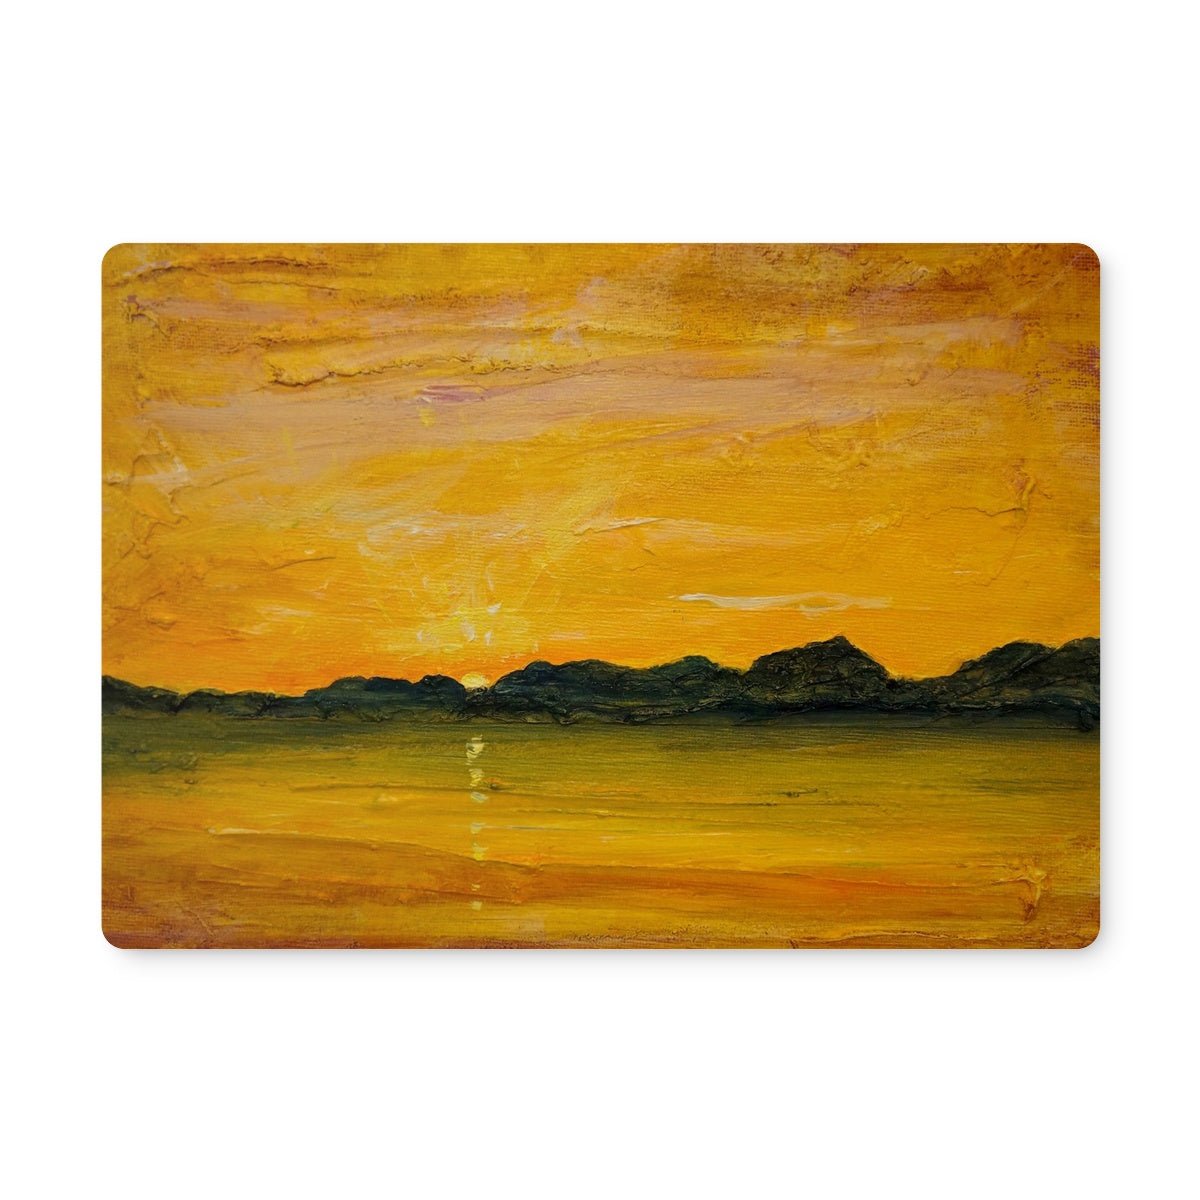 Jura Sunset Art Gifts Placemat-Placemats-Hebridean Islands Art Gallery-2 Placemats-Paintings, Prints, Homeware, Art Gifts From Scotland By Scottish Artist Kevin Hunter